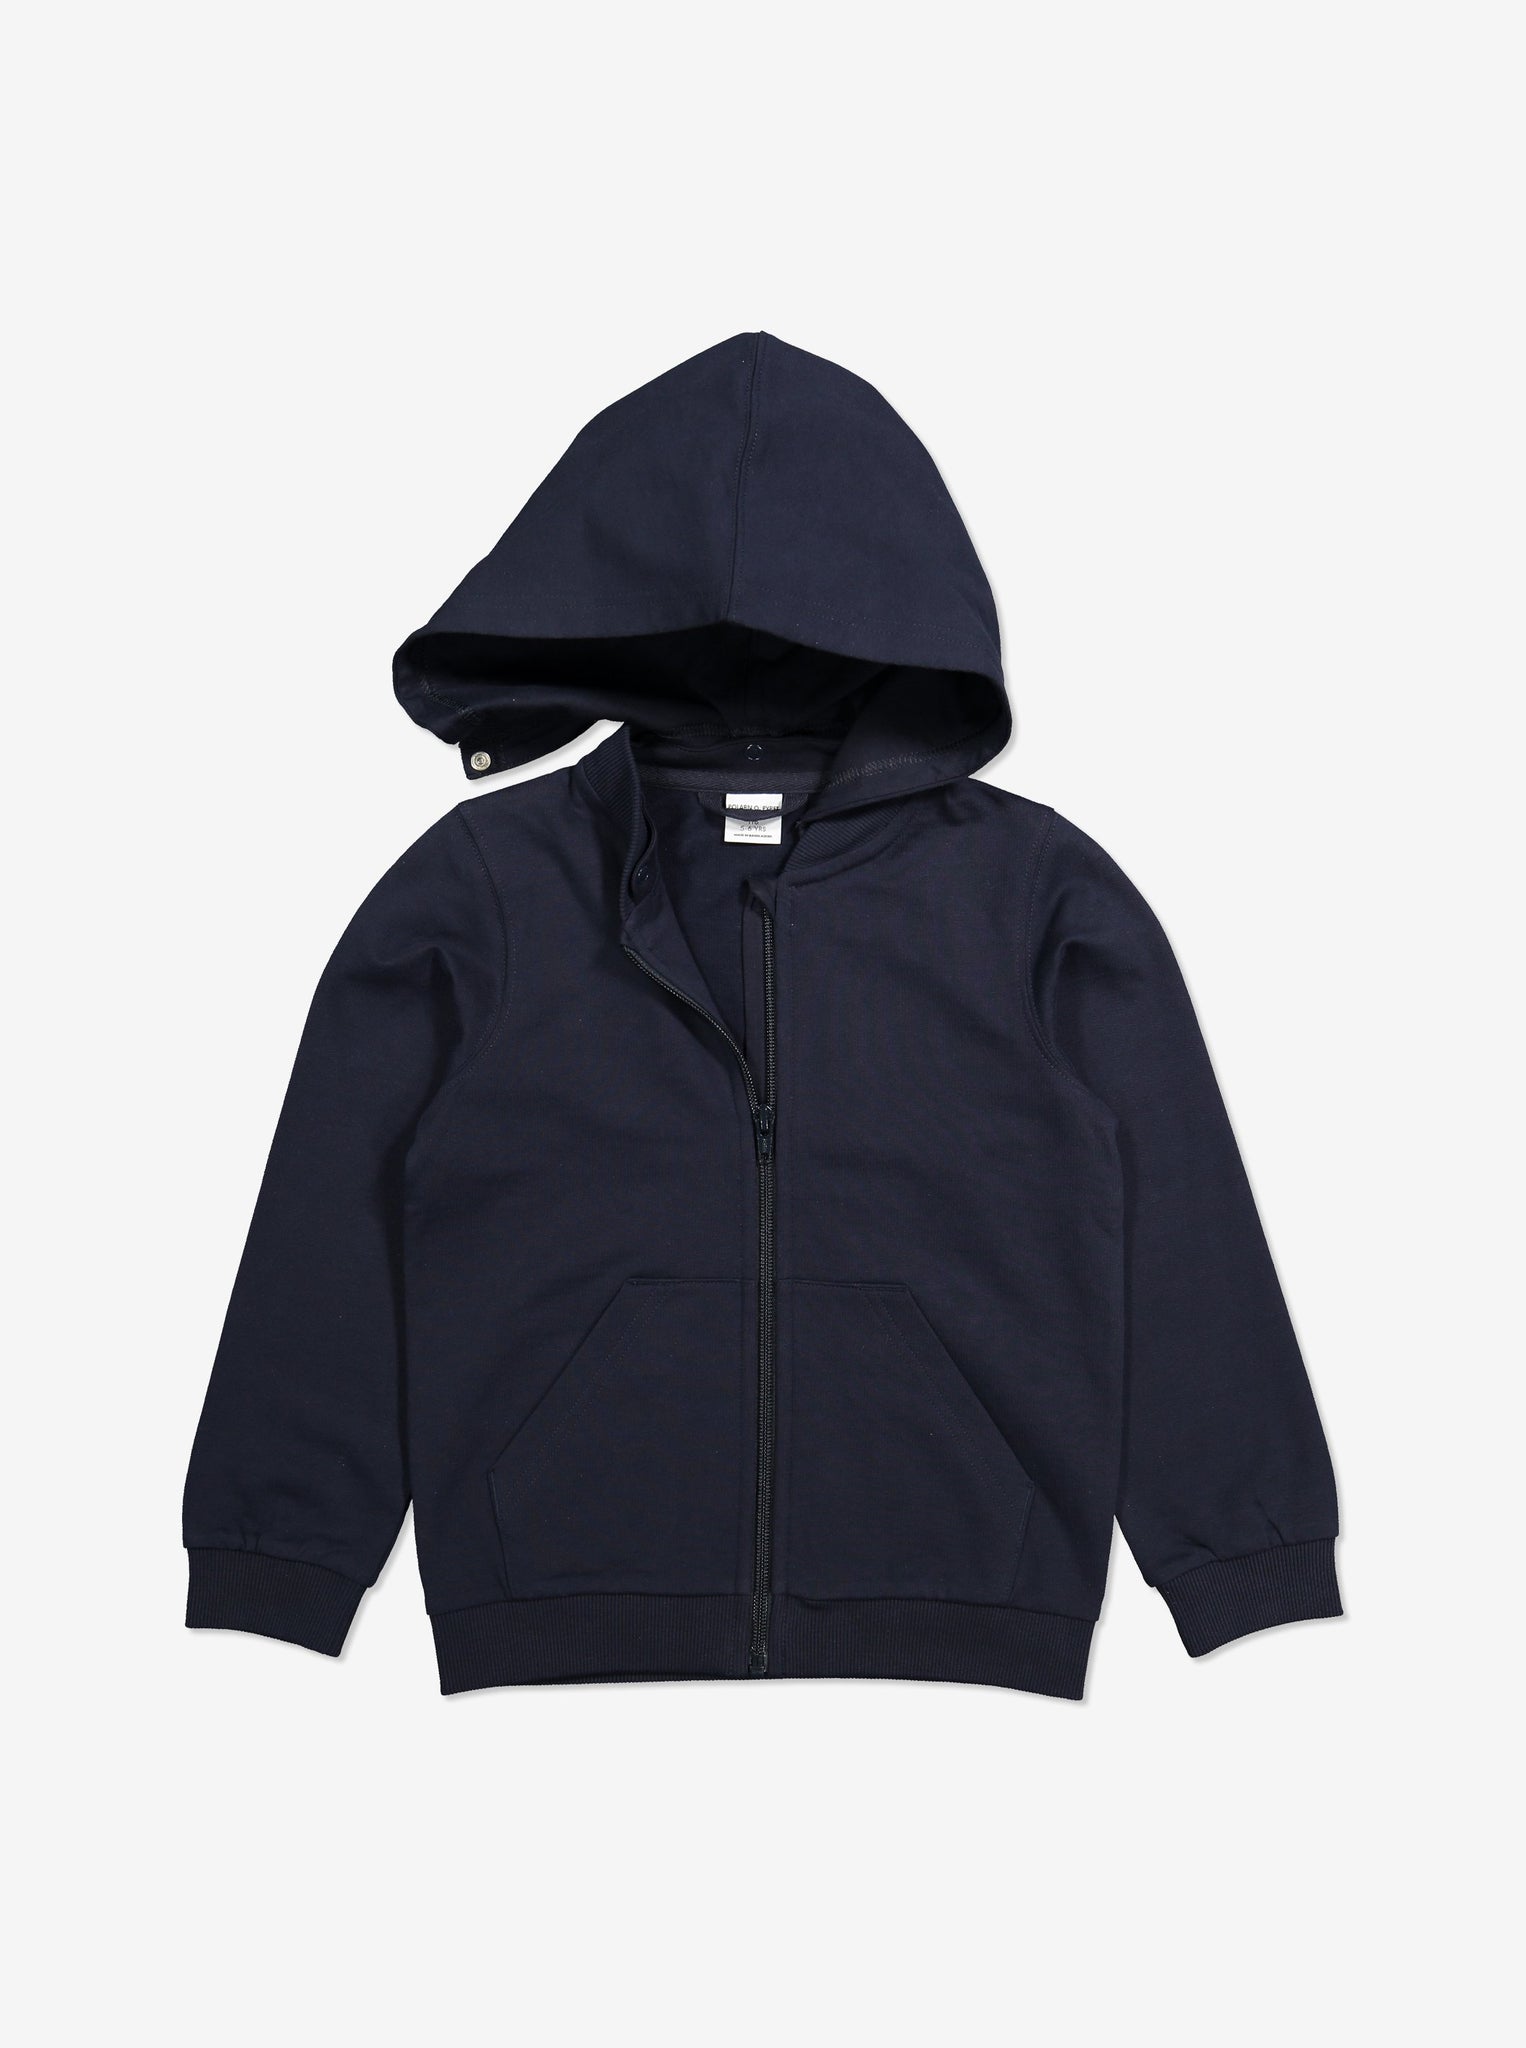 Navy Kids adjustable hoodie, sustainable organic cotton, durable and comfortable, polarn o. pyret quality